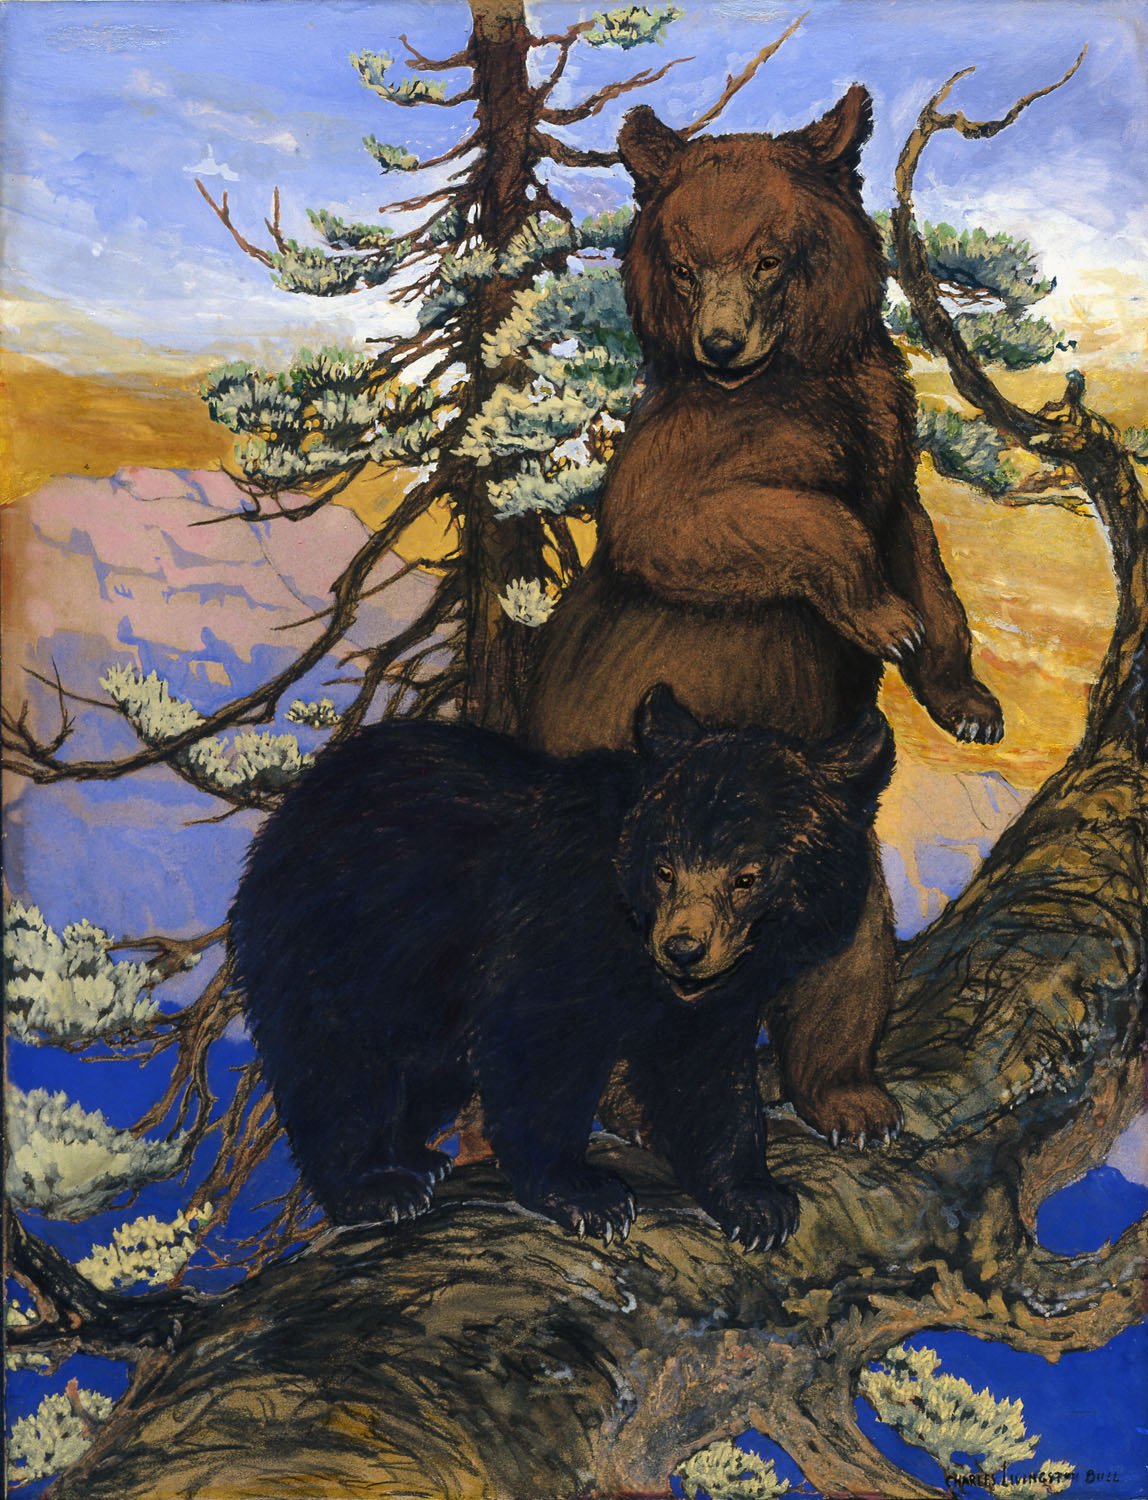   Charles Livingston Bull (1874-1932)   Two Bear Cubs in Tree  1930, charcoal, watercolor and gouache 25 1/2” x 19 1/2”, signed lower right  Saturday Evening Post,  August 16, 1930 cover 